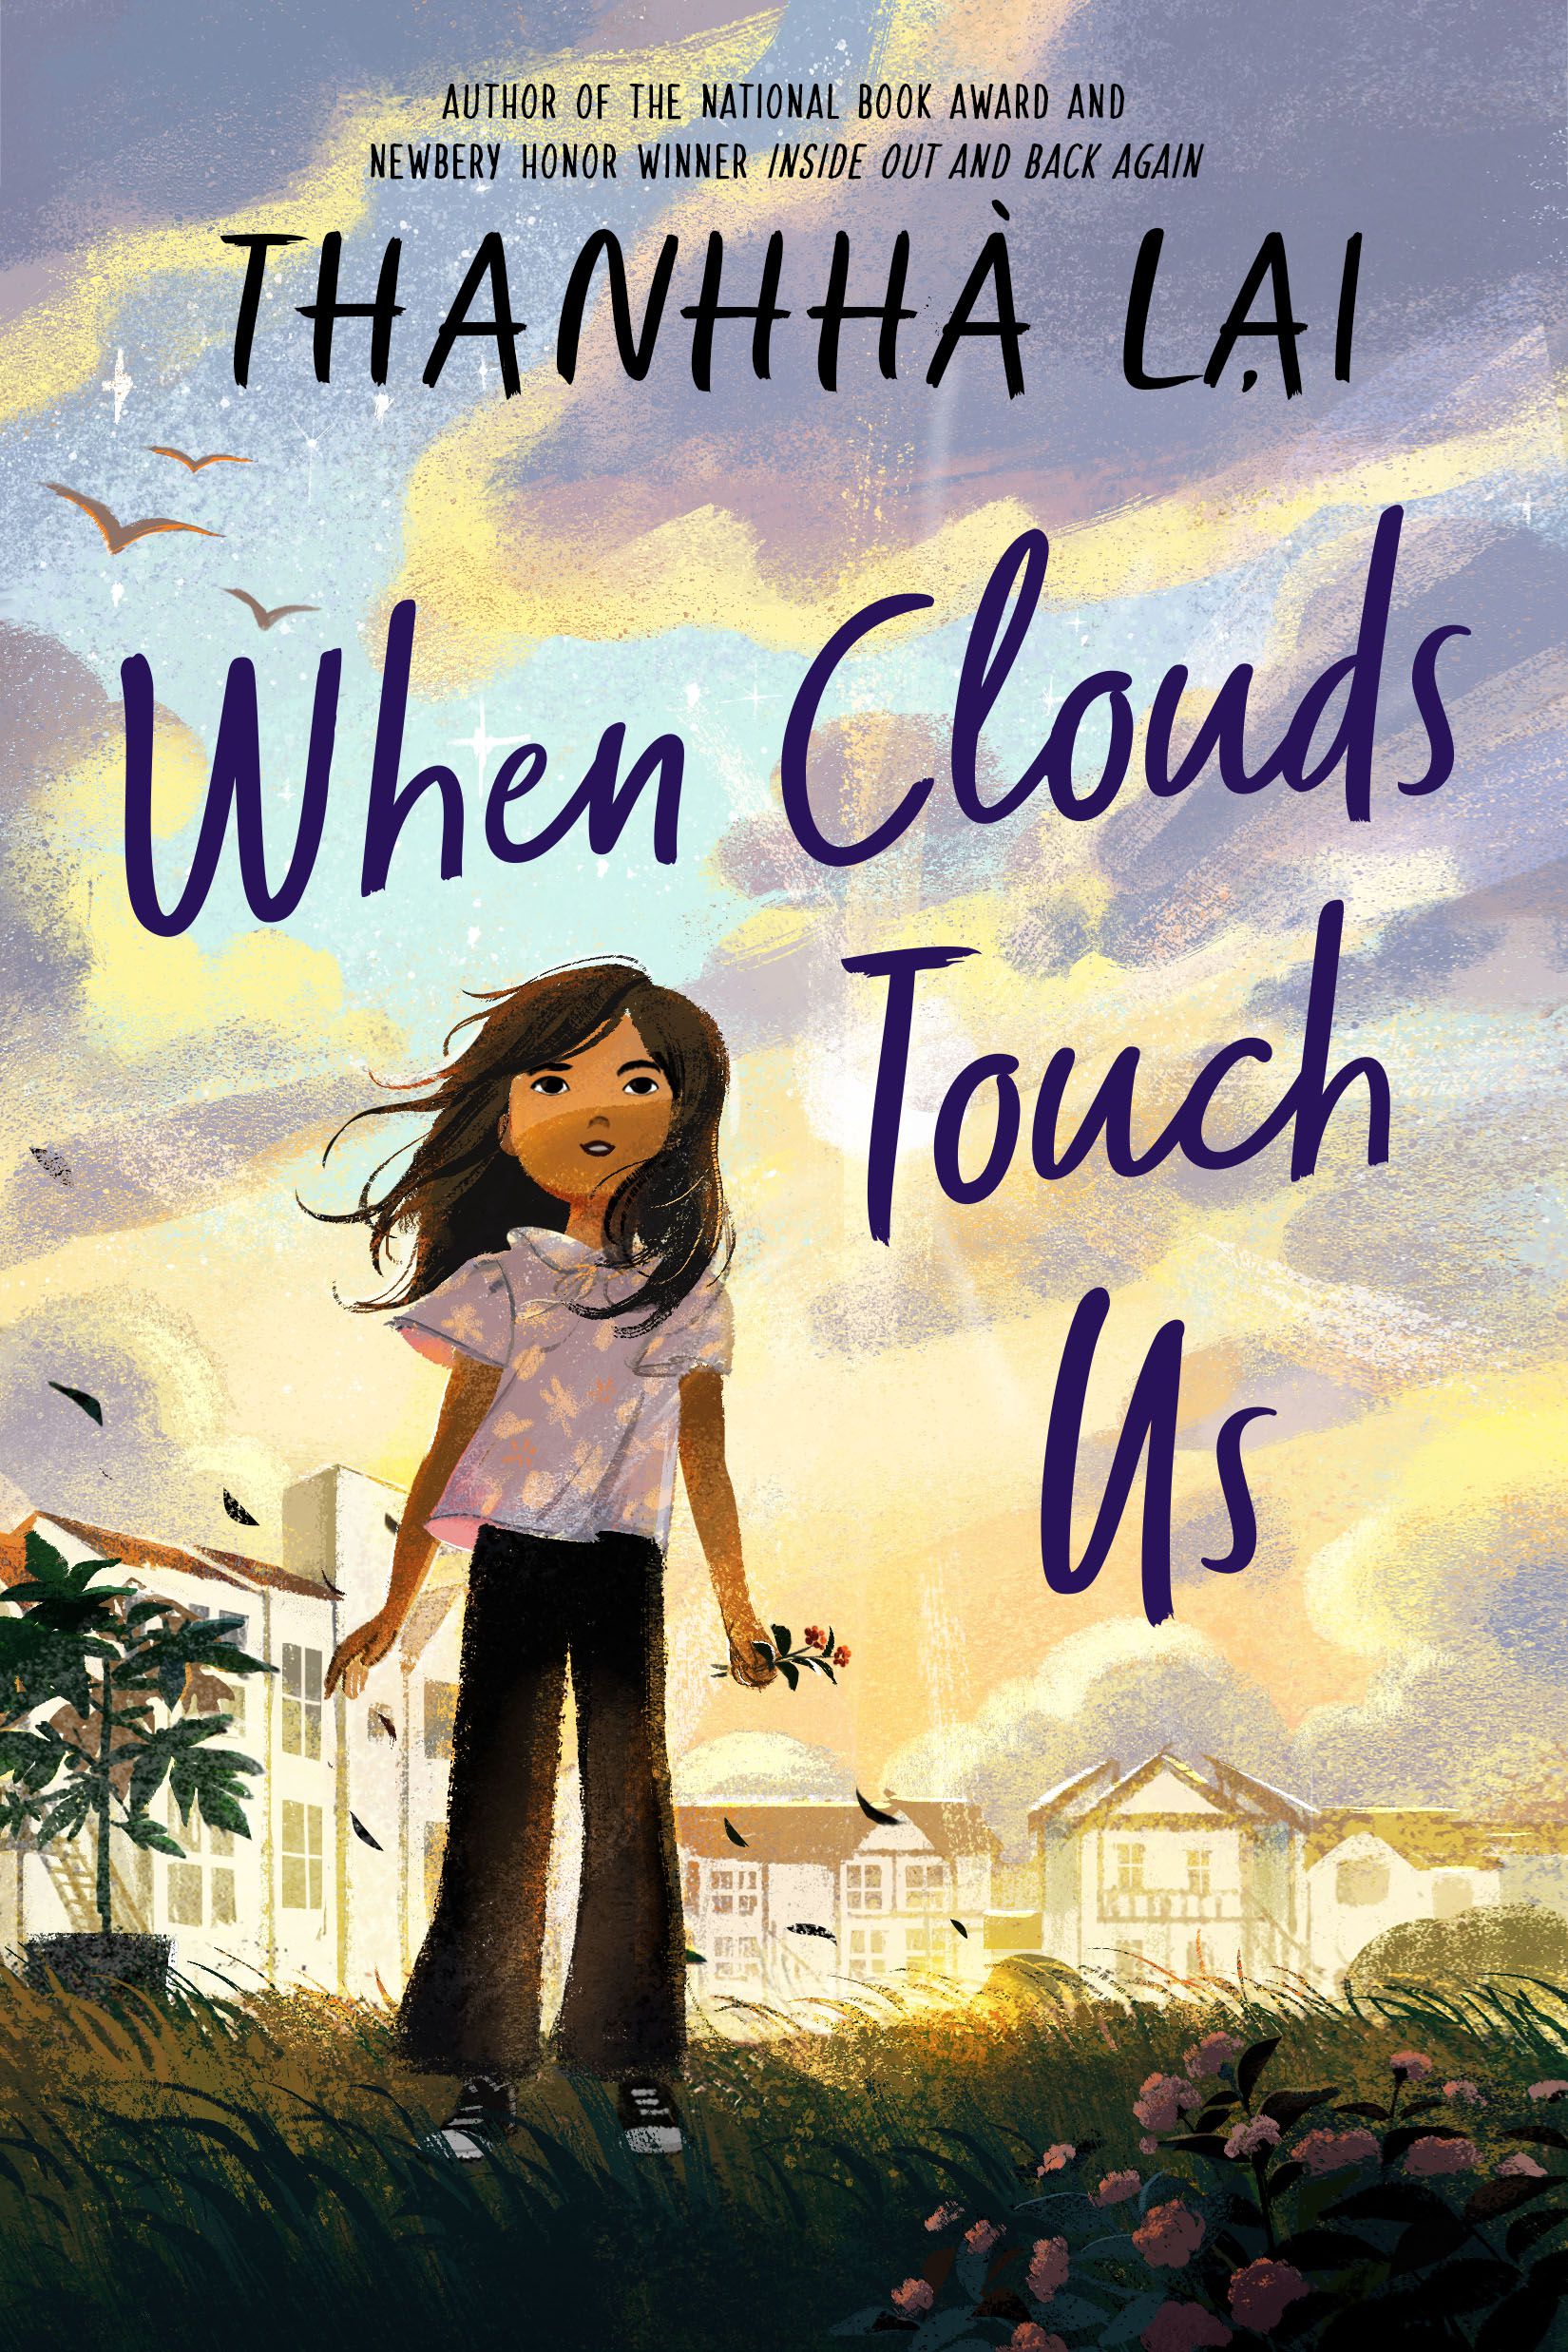 When Clouds Touch Us by Thanhha Lai book cover